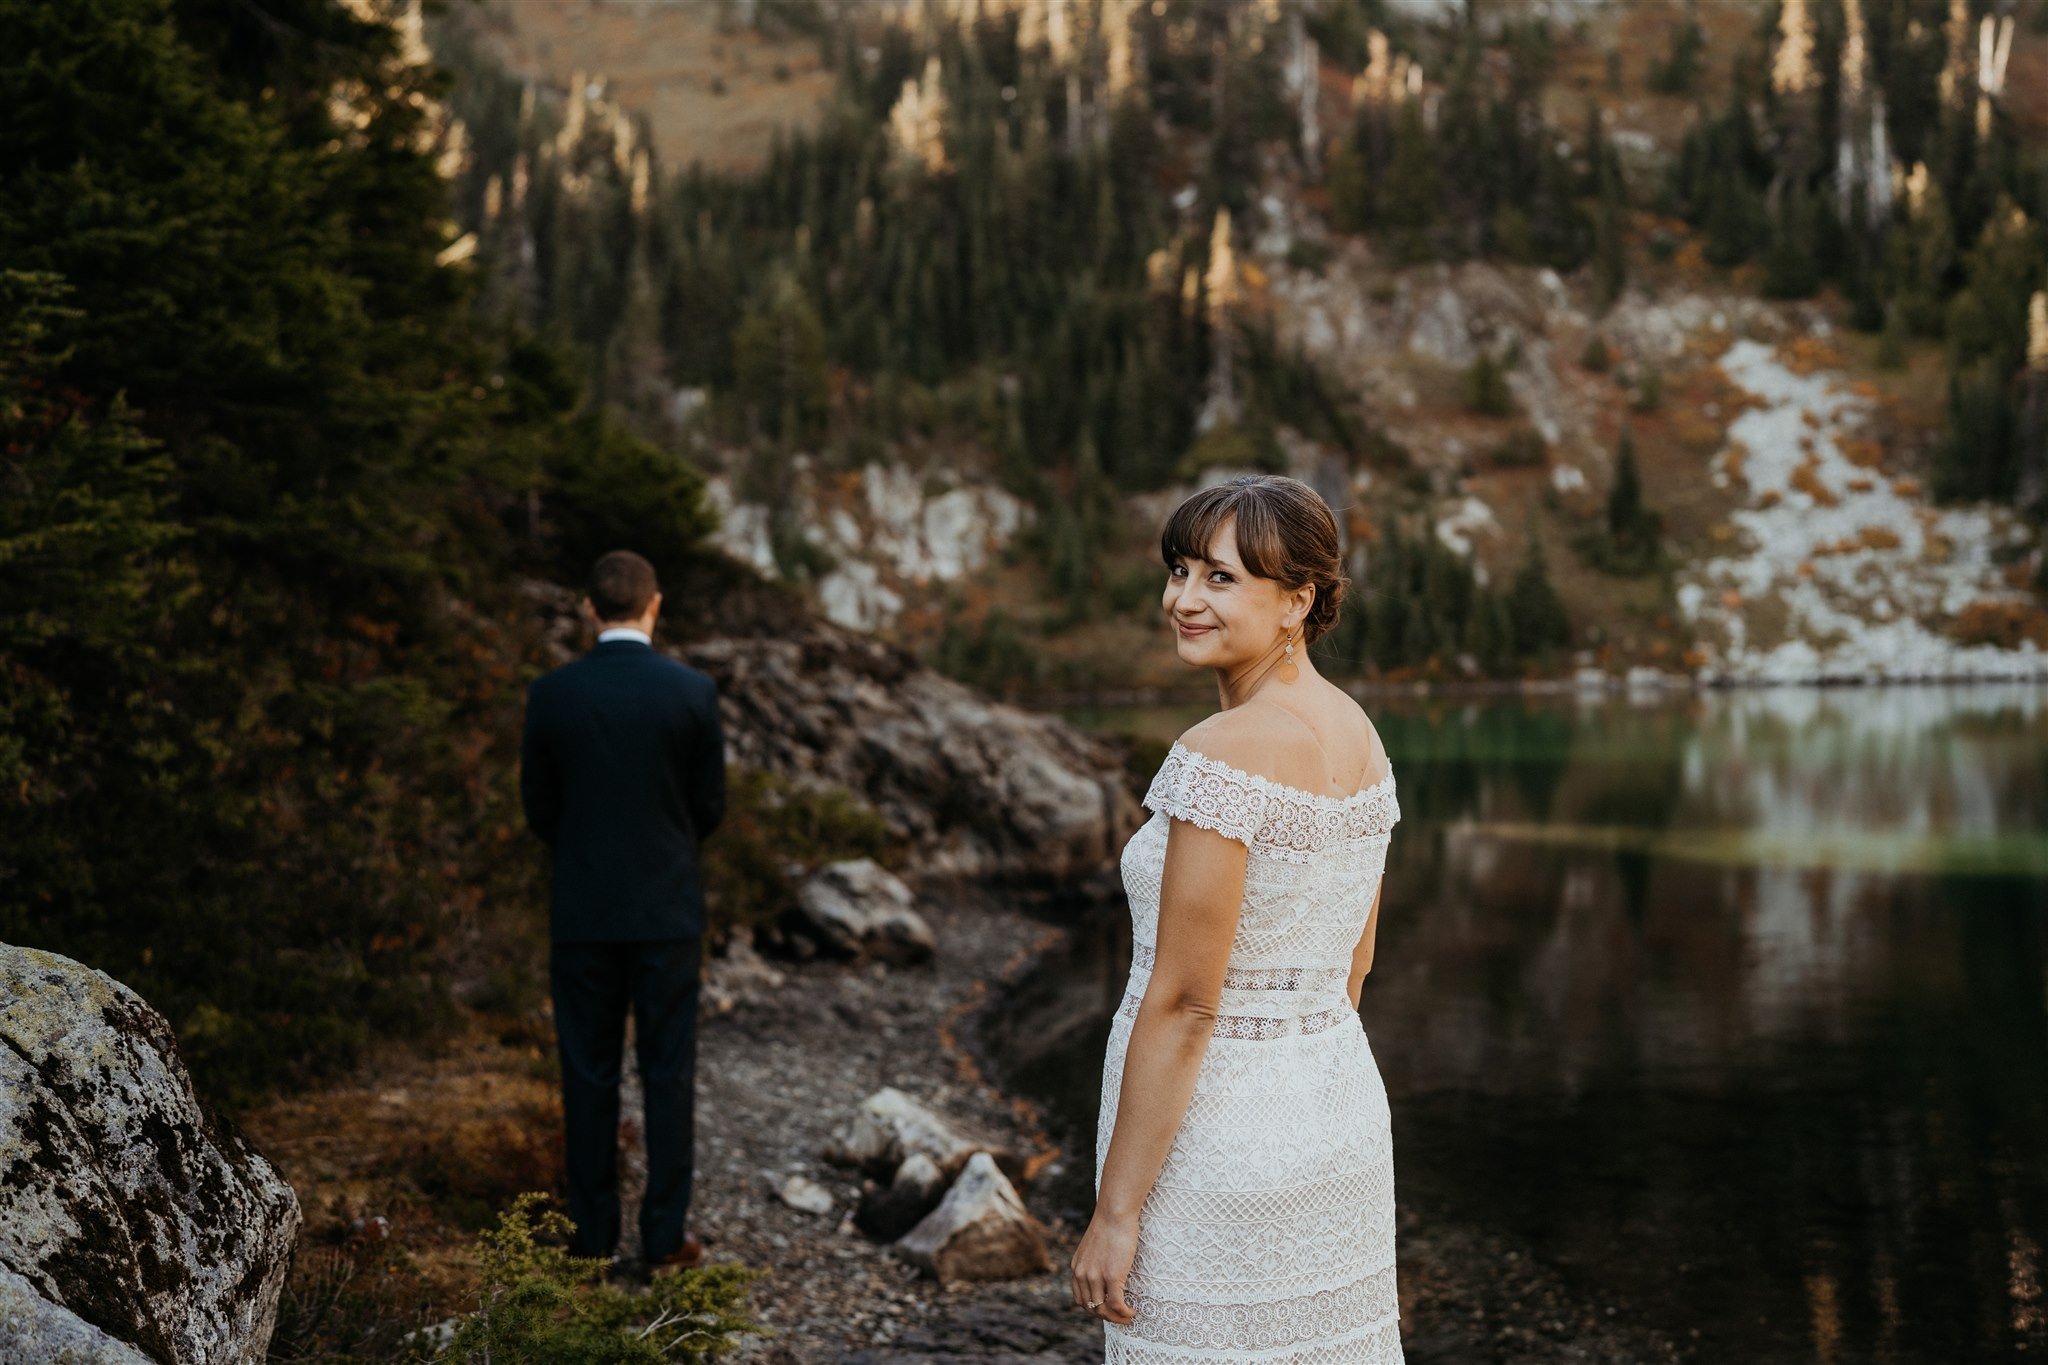 Bride smiling before first look moment with groom in Mt Rainier National Park